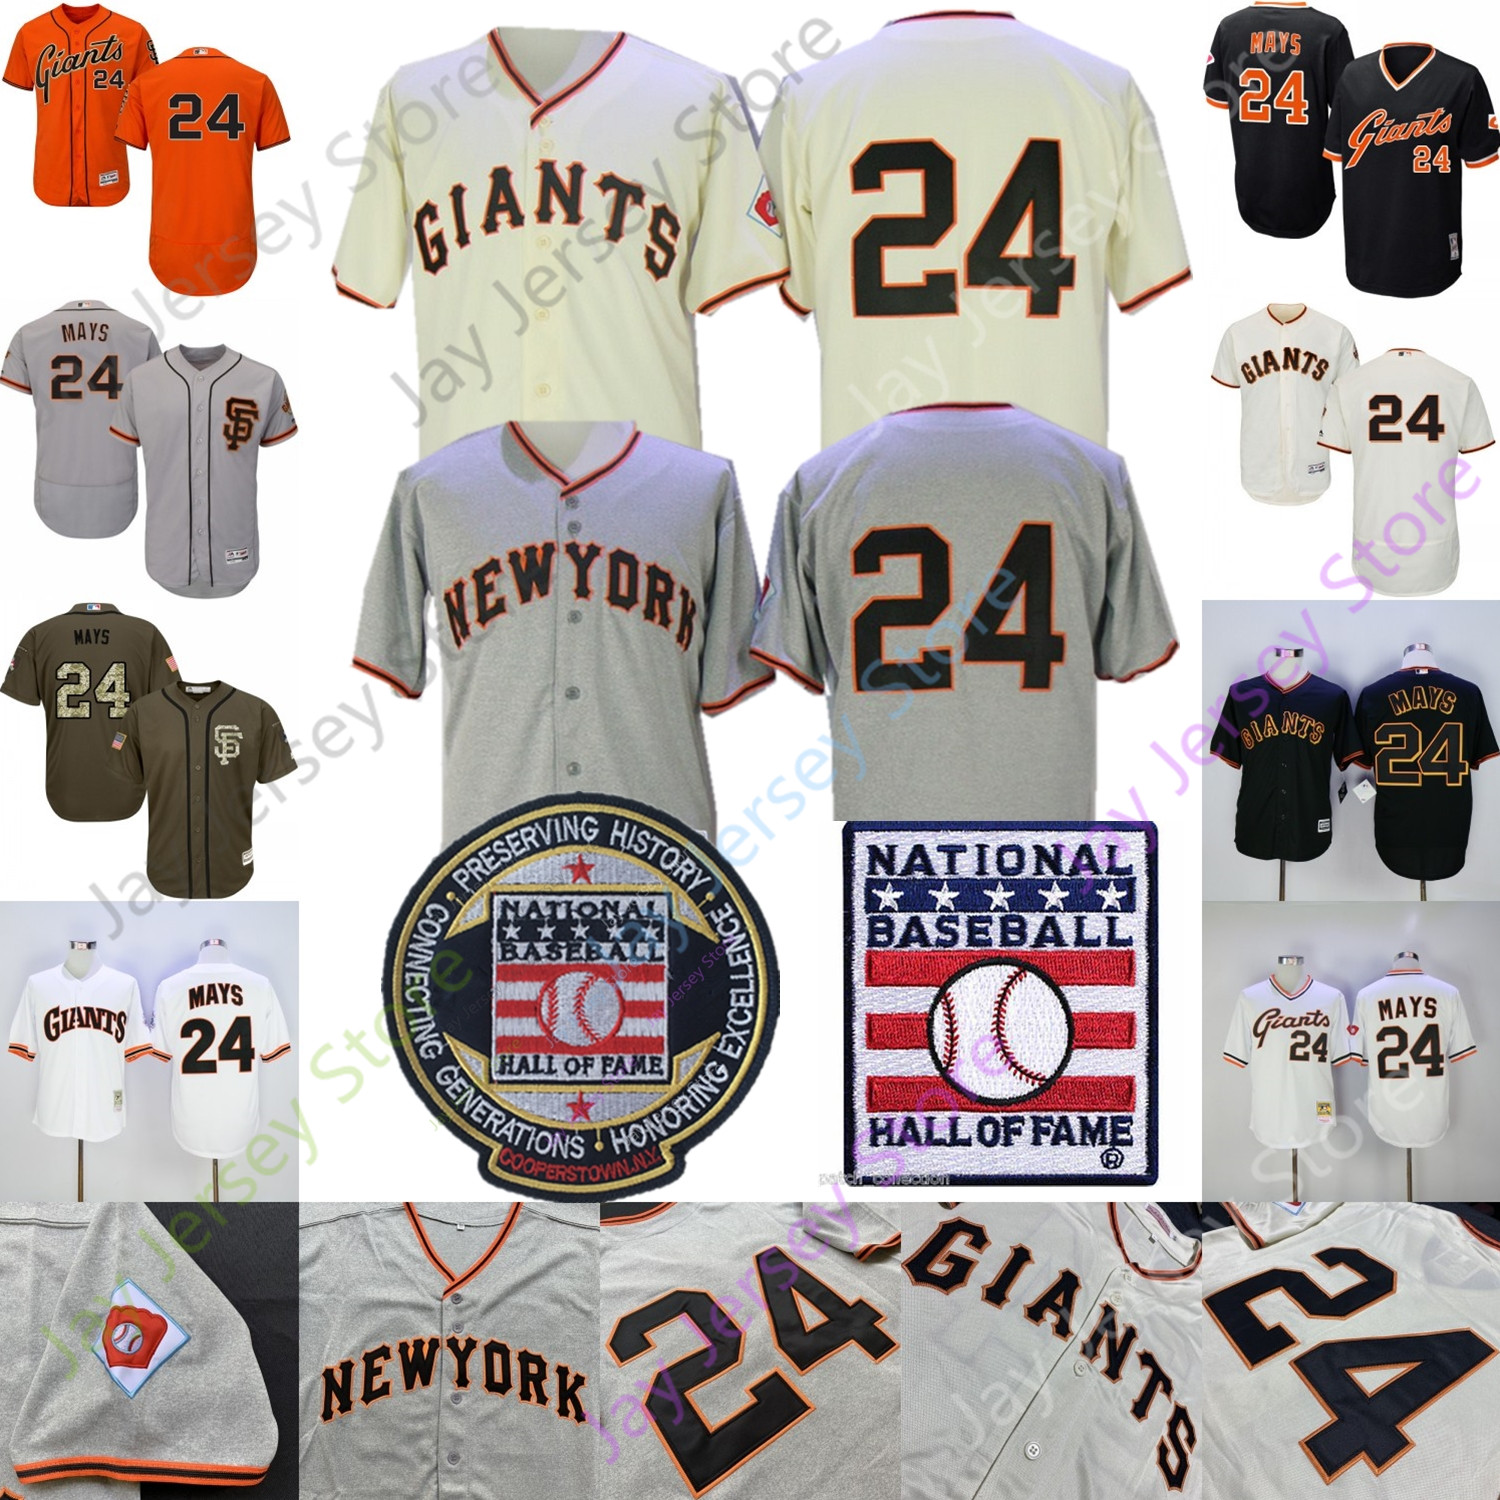 willie mays jersey for sale